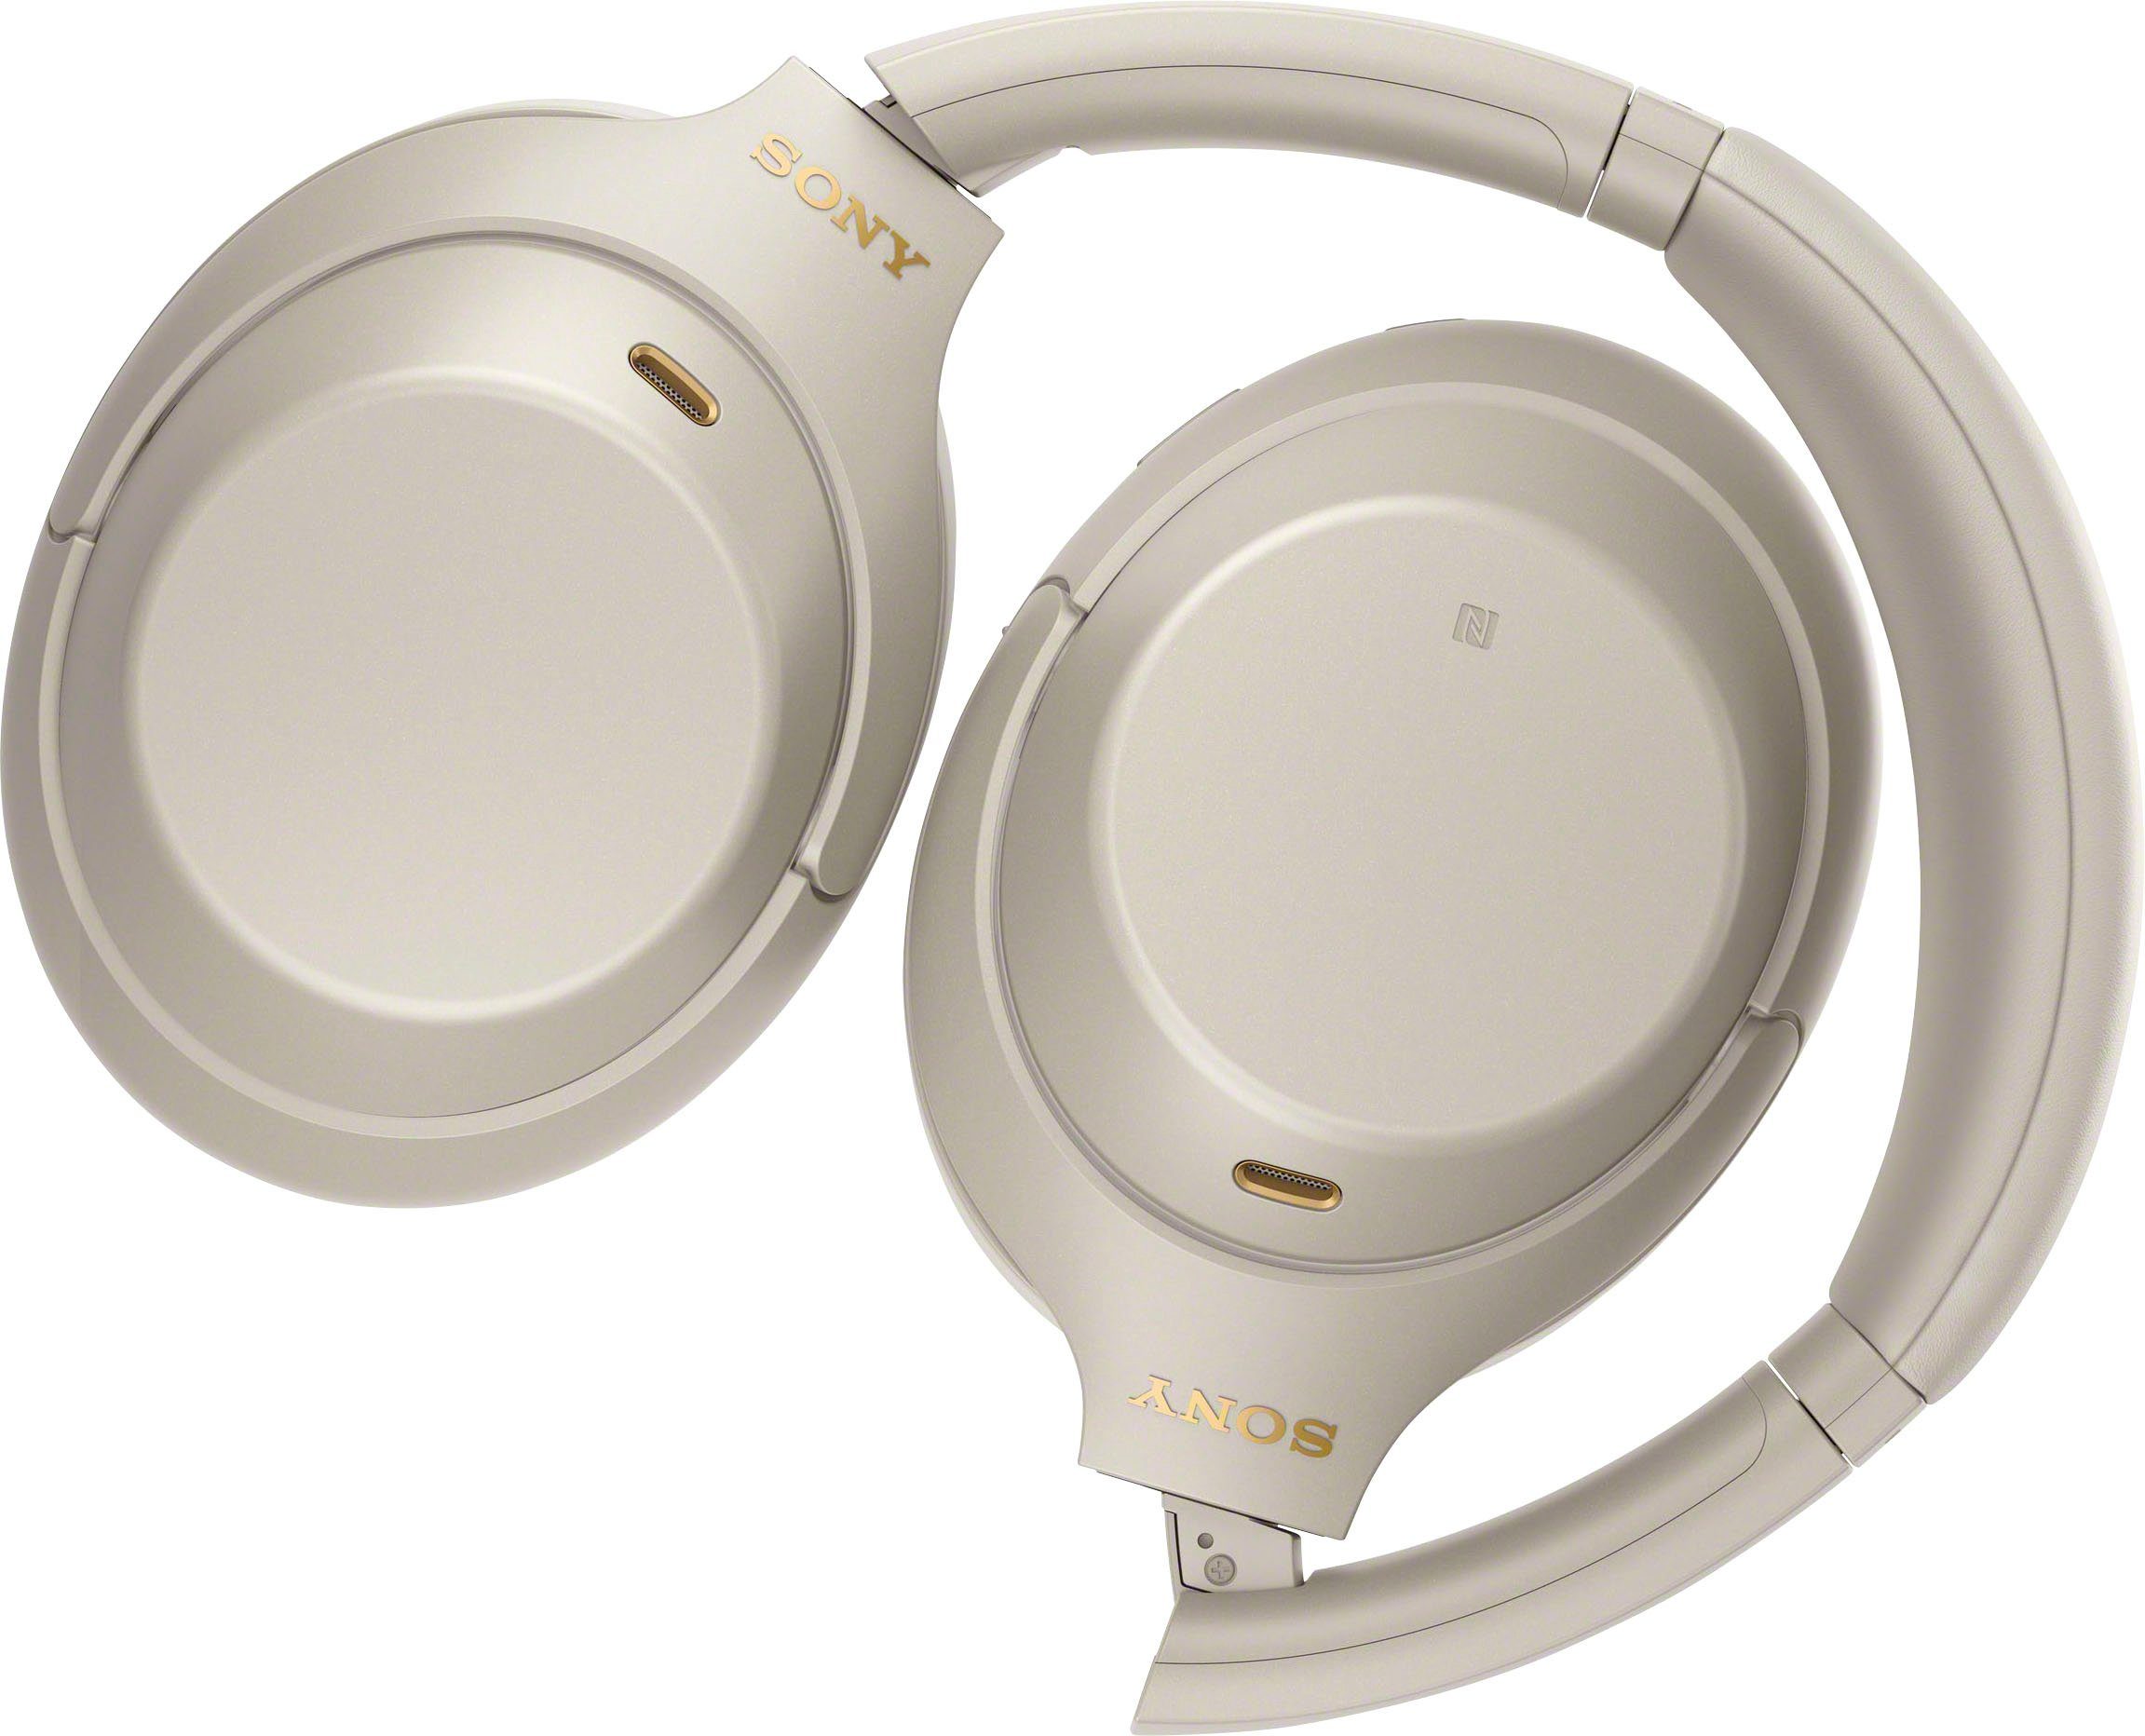 Sony WH-1000XM4 kabelloser Schnellladefunktion) via Sensor, Verbindung Silber Bluetooth, NFC, NFC, Over-Ear-Kopfhörer Touch (Noise-Cancelling, One-Touch